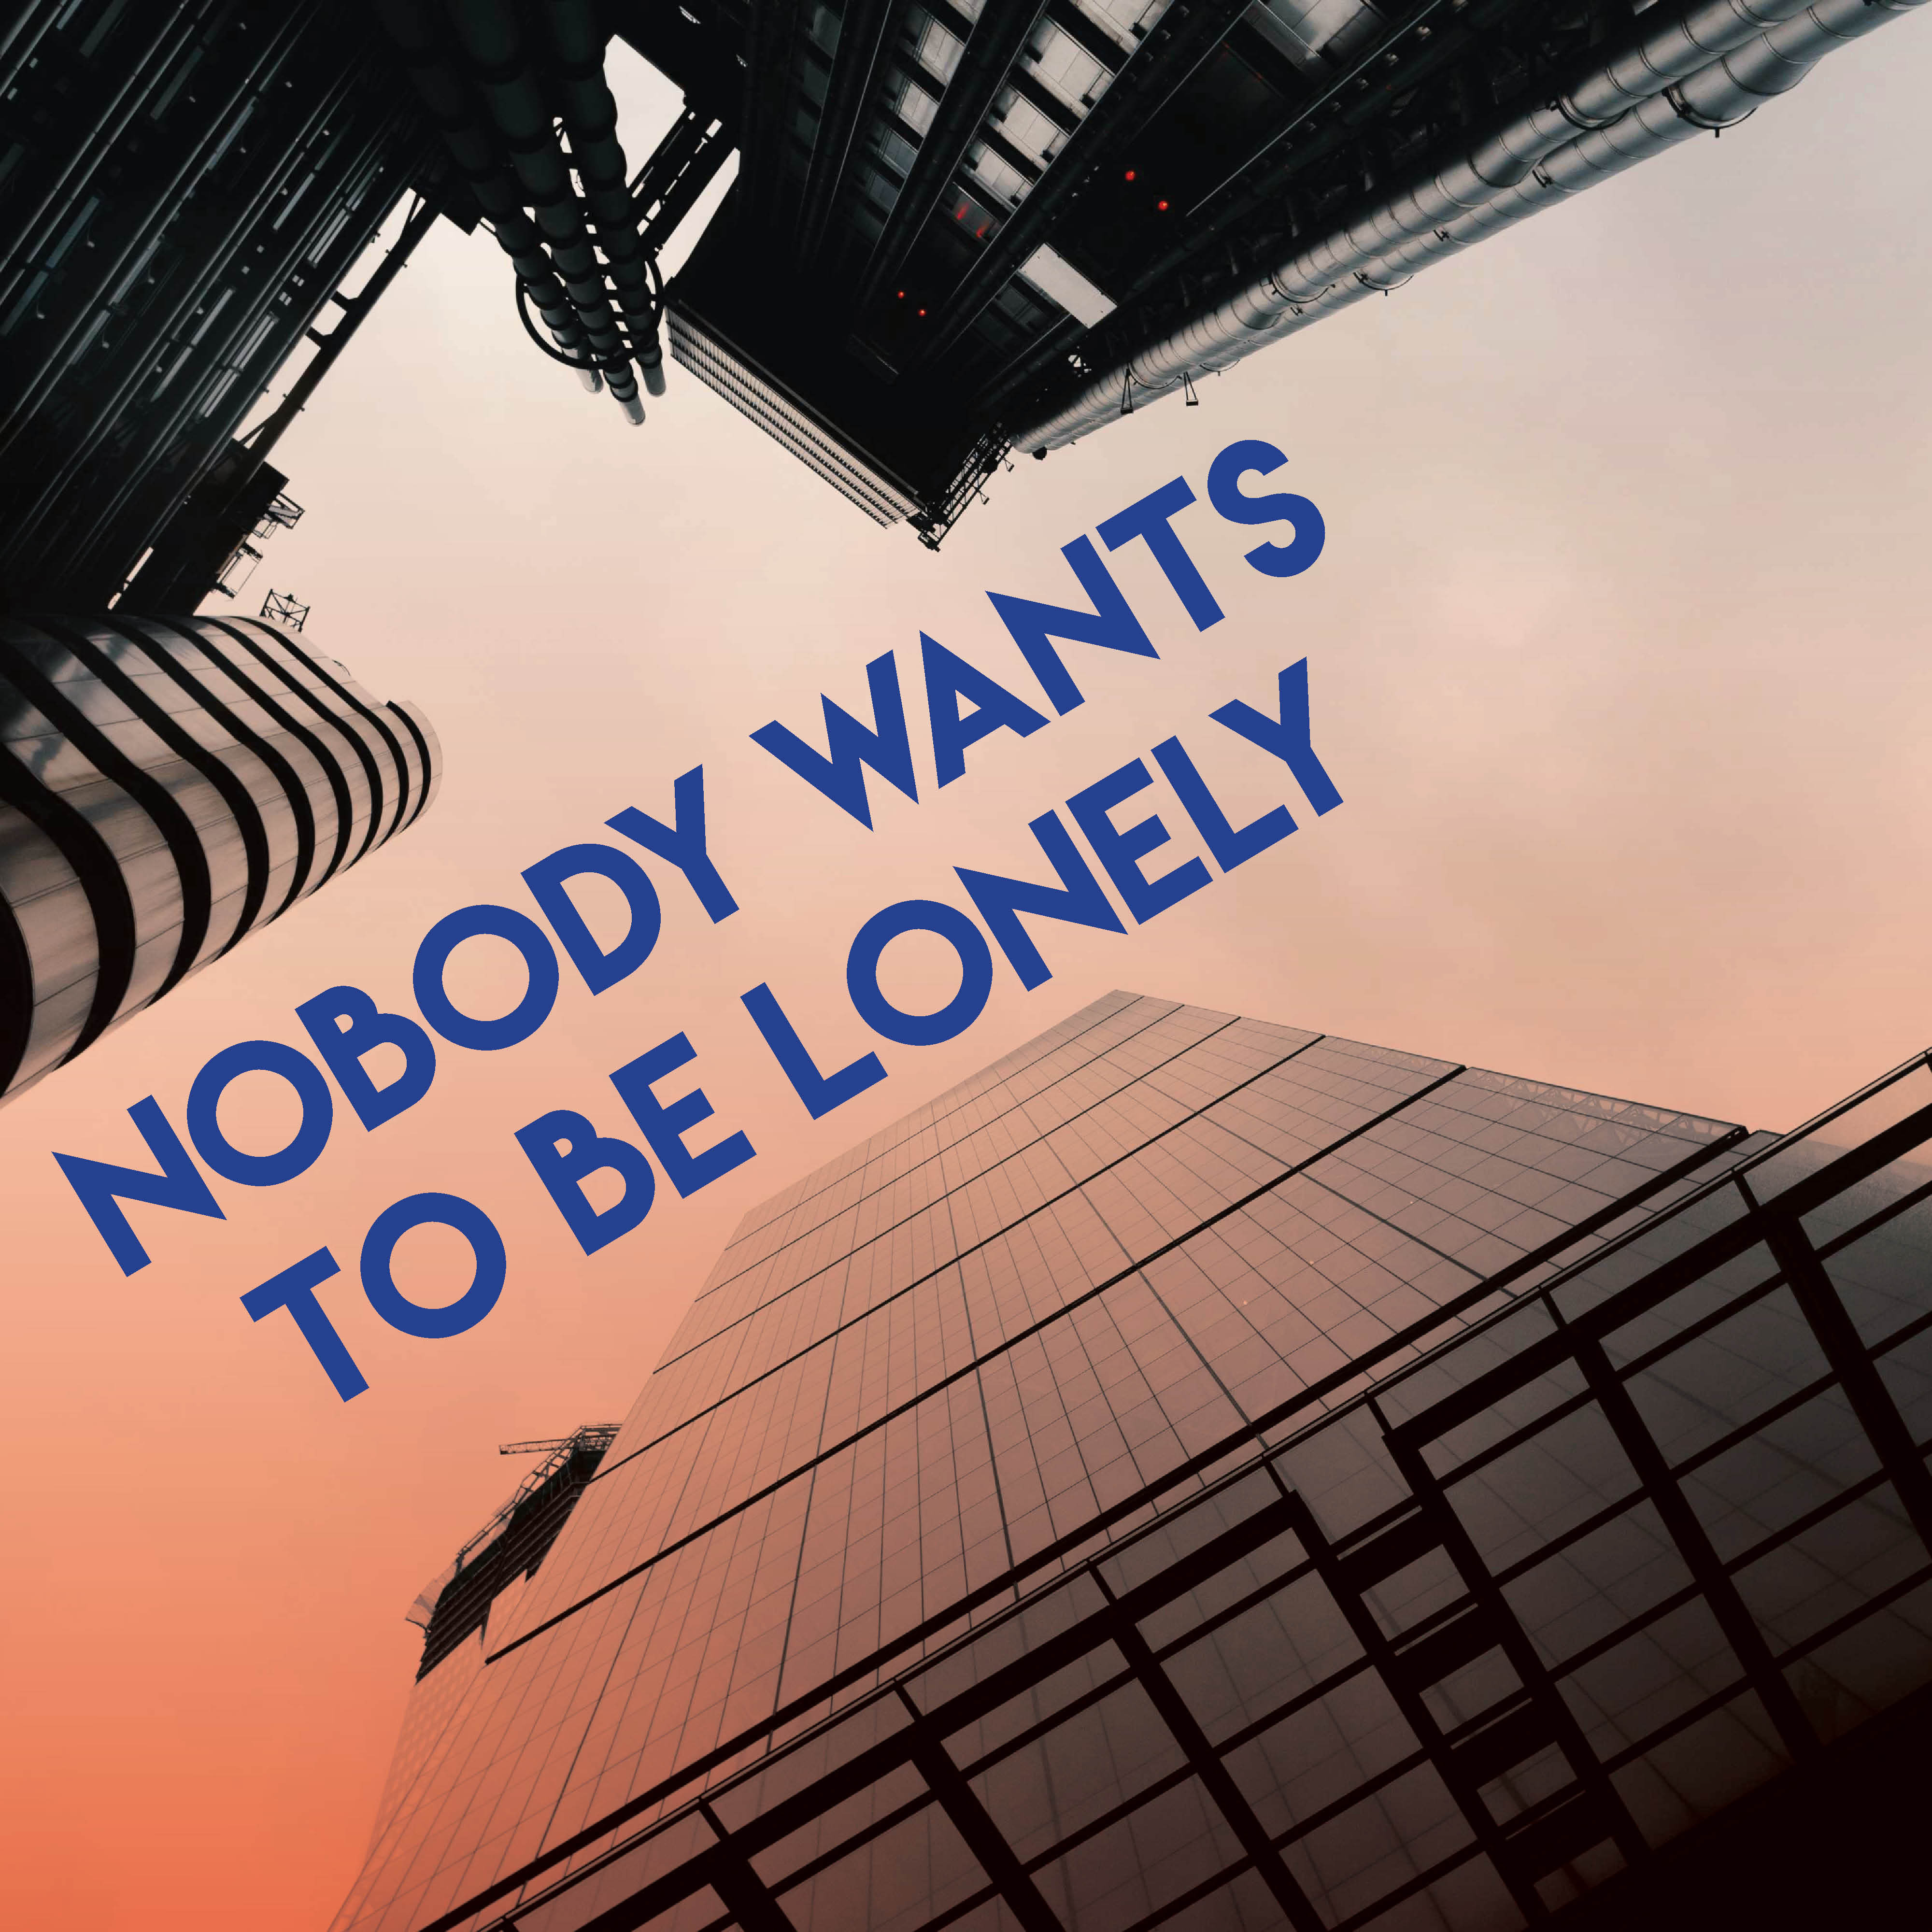 Nobody Wants to Be Lonely